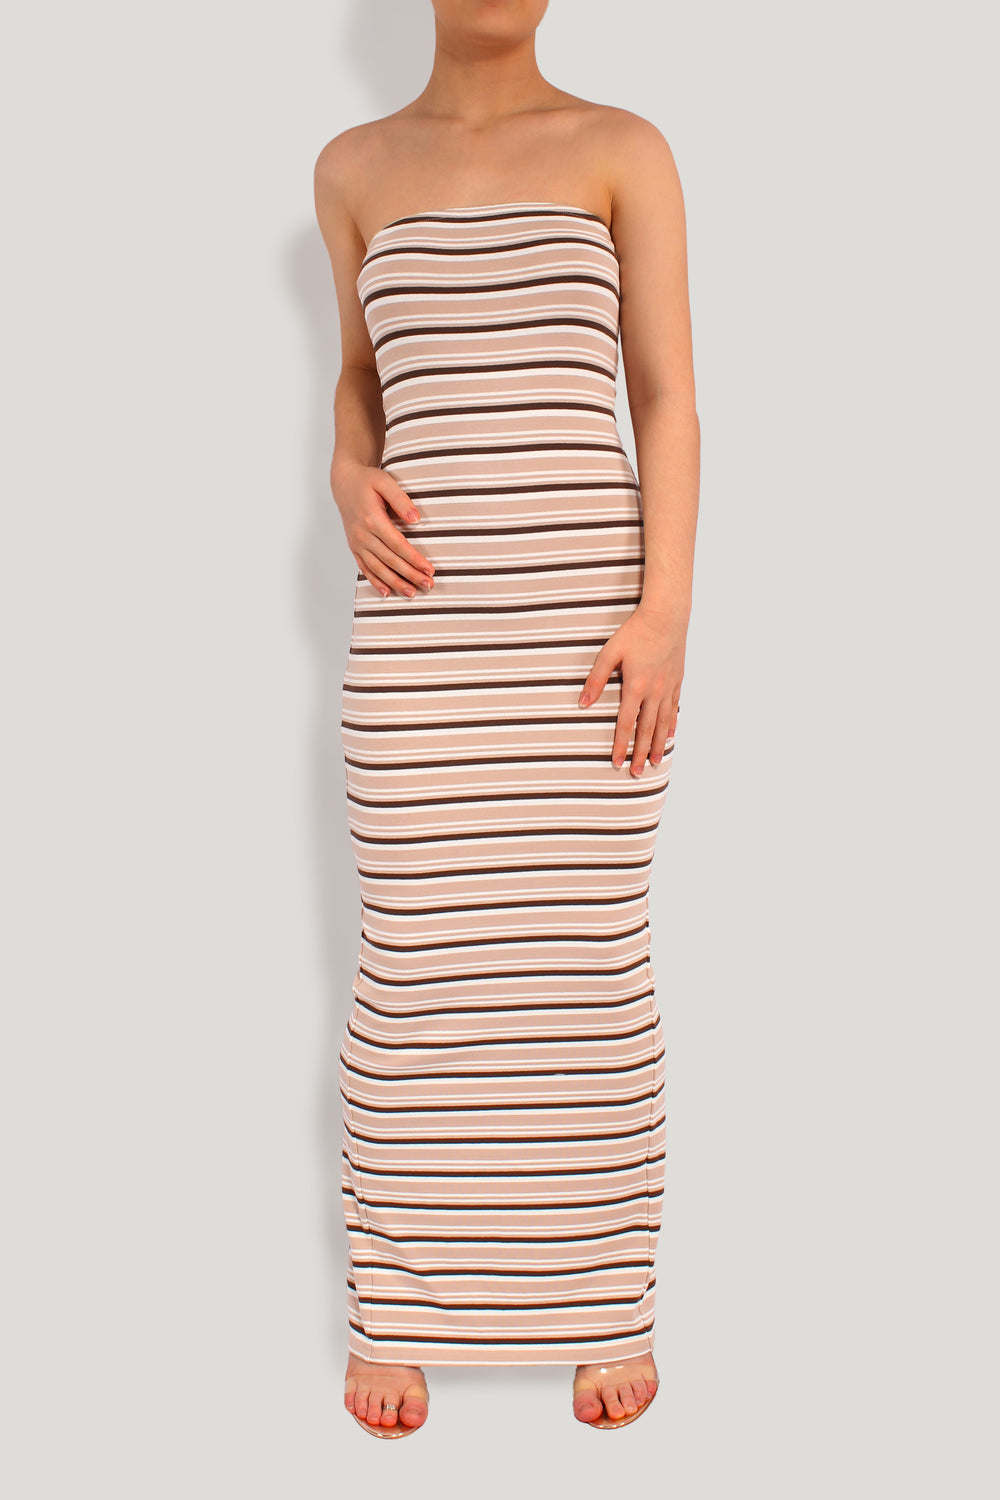 LETS RELAX STRIPED MAXI DRESS